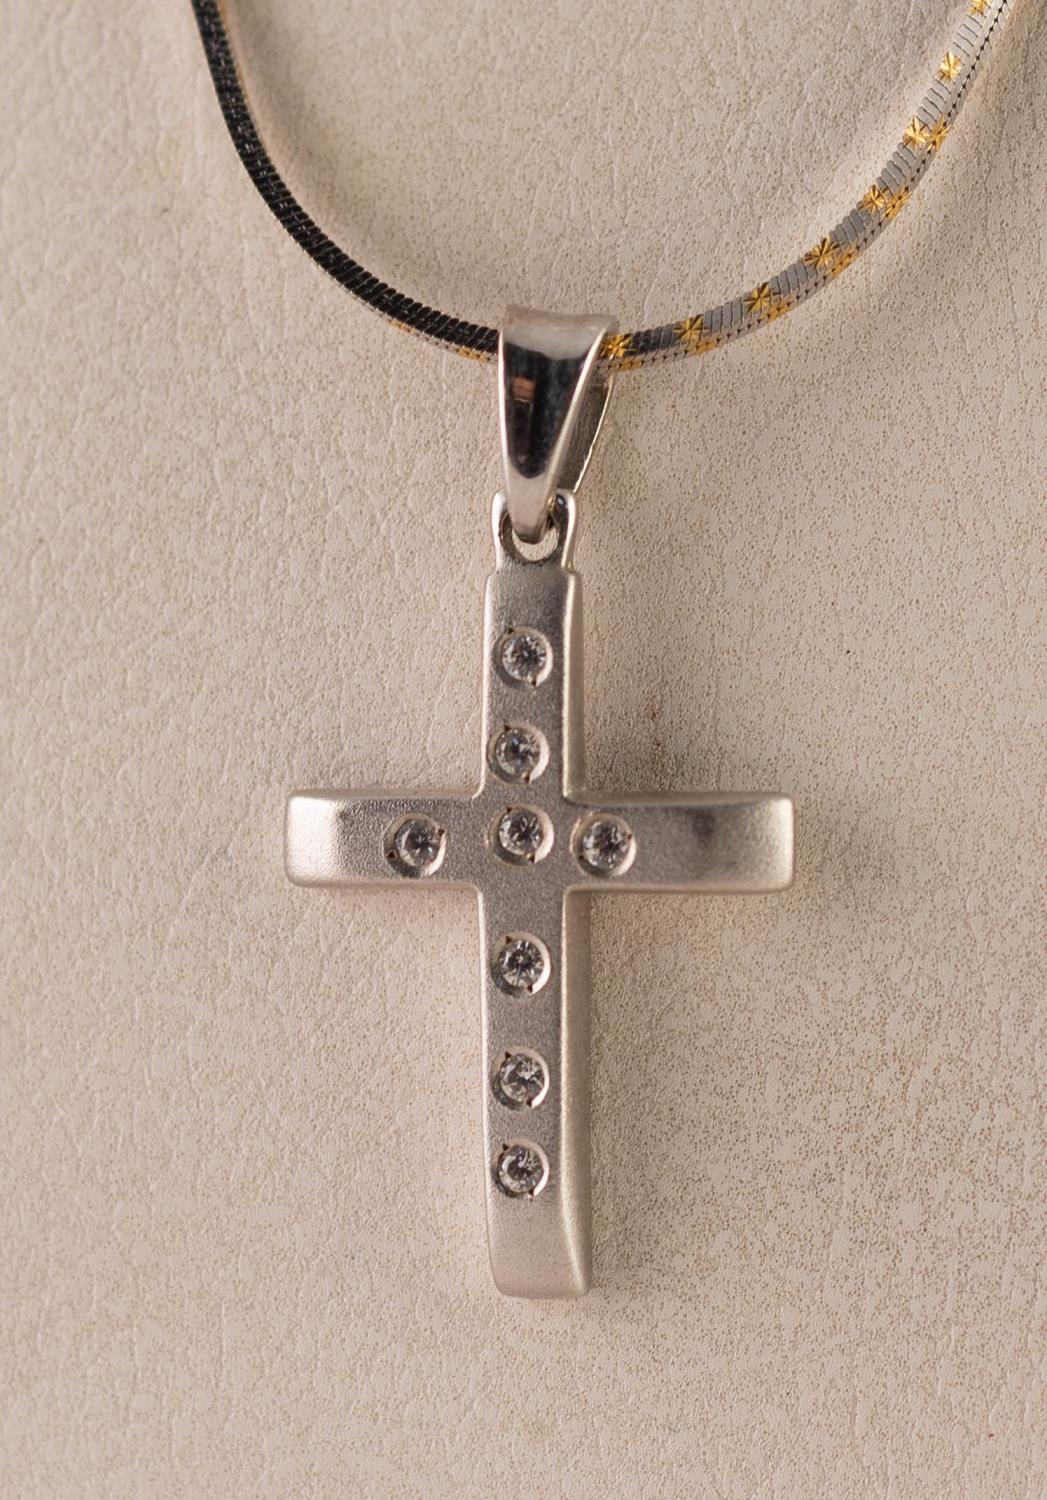 14ct WHITE GOLD FINE SQUARE SECTION CHAIN NECKLACE with trigger clasp, 18in (45.7cm) long and the - Image 2 of 2